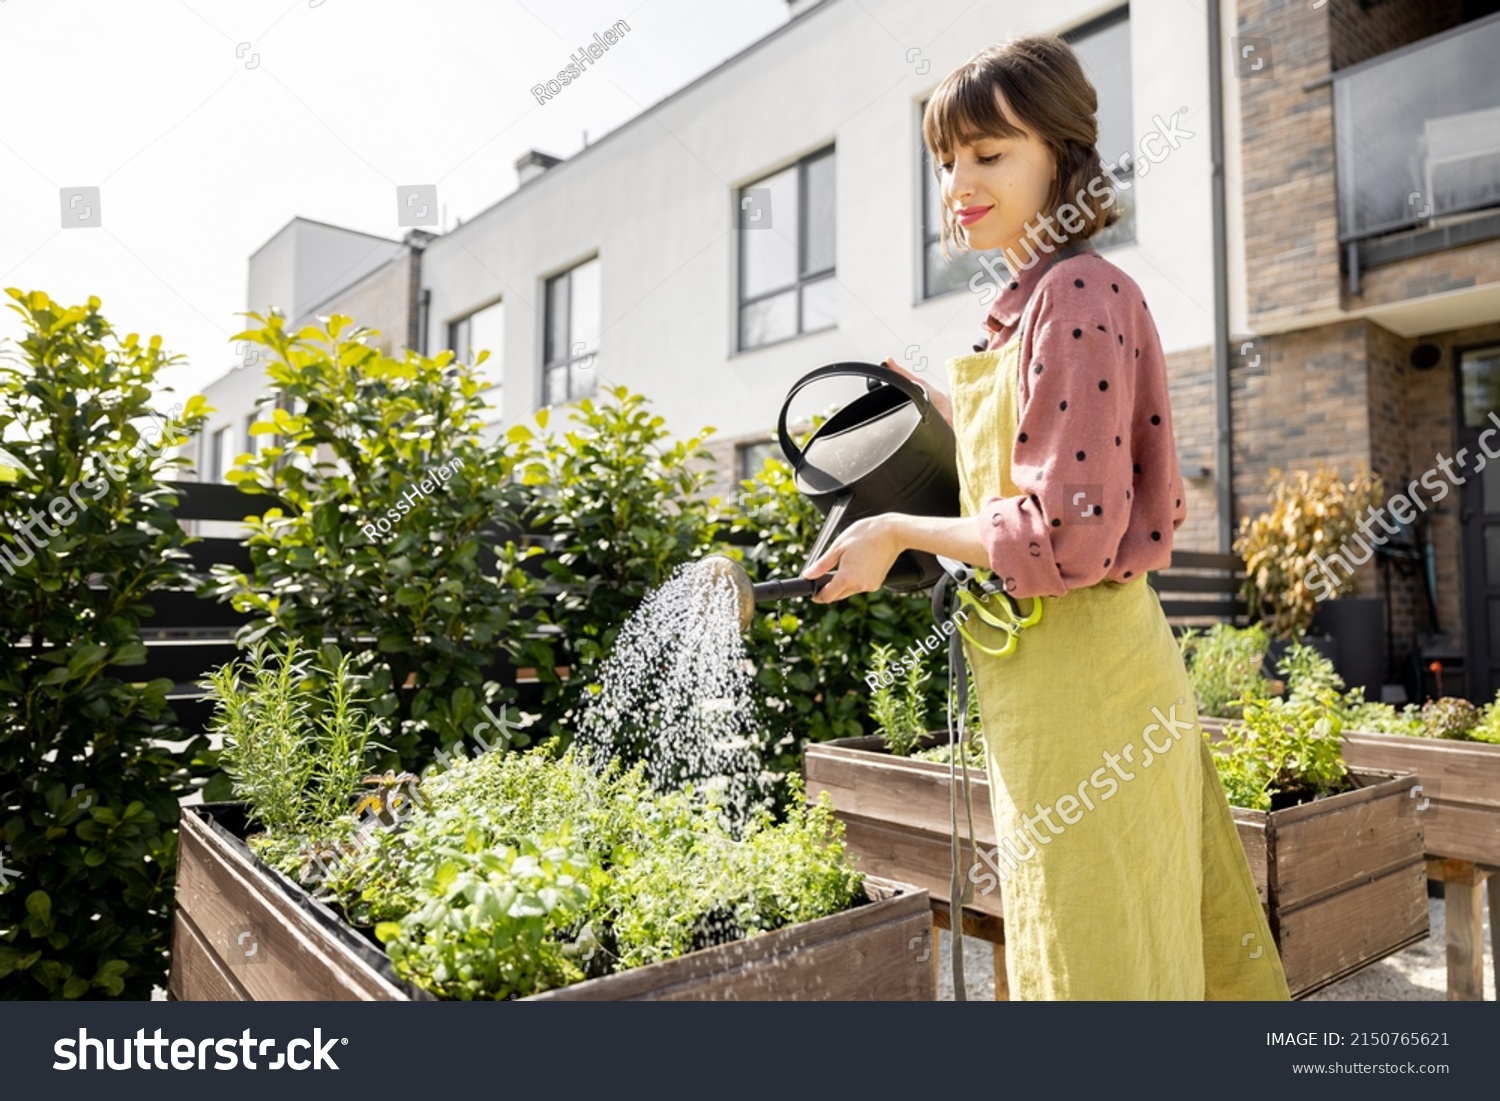 Woman watering fresh herbs growing at home vegetable garden. Gardener taking care of plants at the backyard of her house. Concept of sustainability and growing organic #2150765621